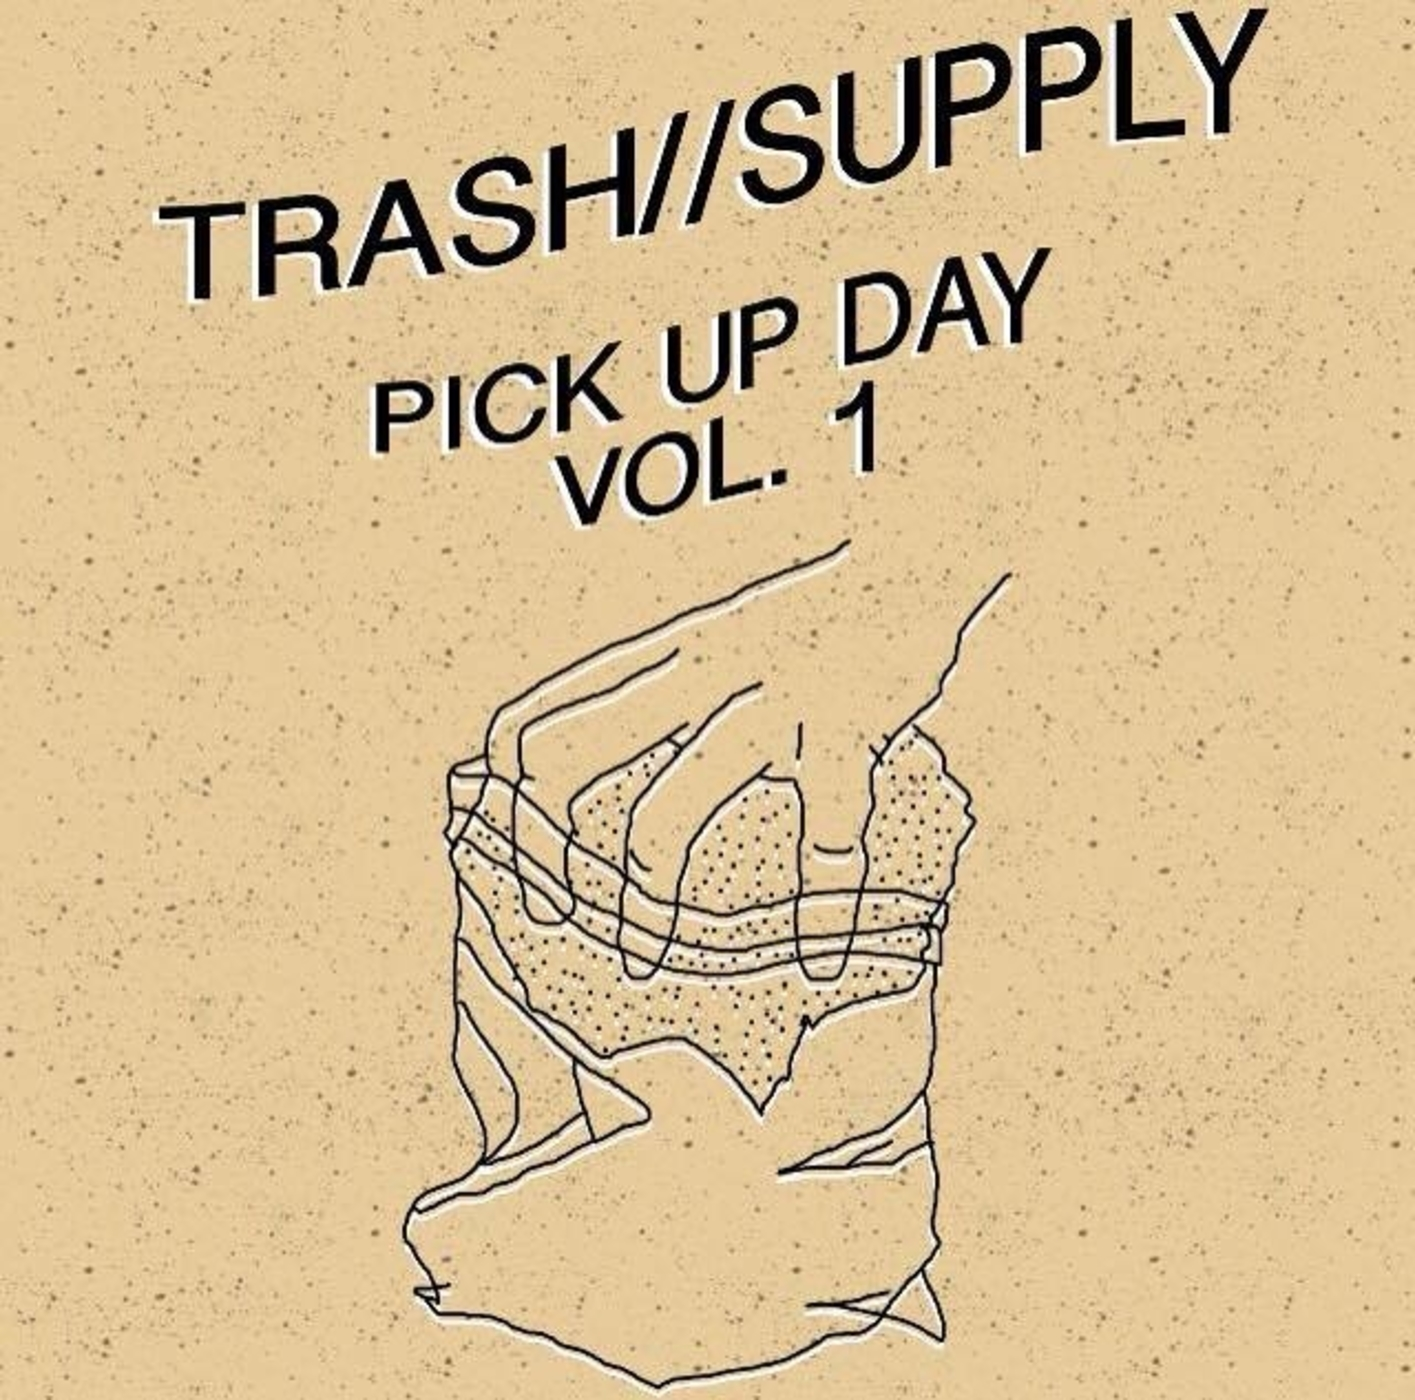 PICK UP DAY VOL. 1